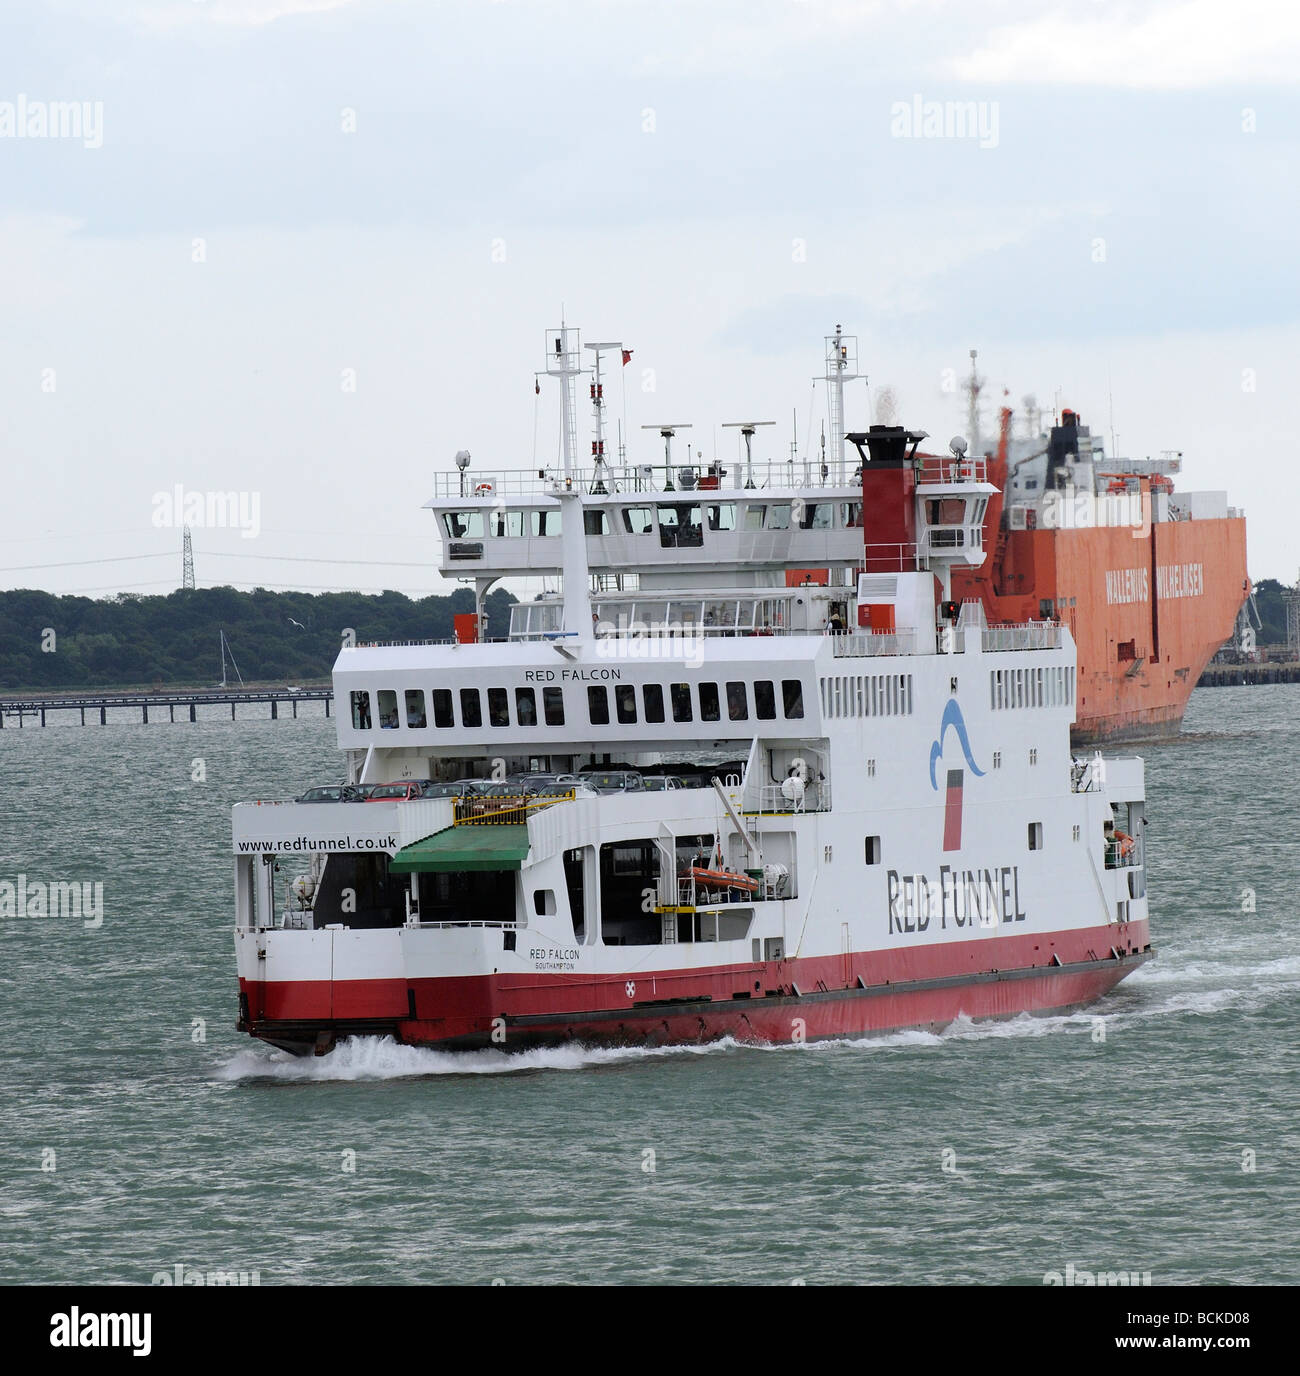 Red Falcon Isle of Wight ferry of the Red Funnel company on Southampton Water England UK Stock Photo